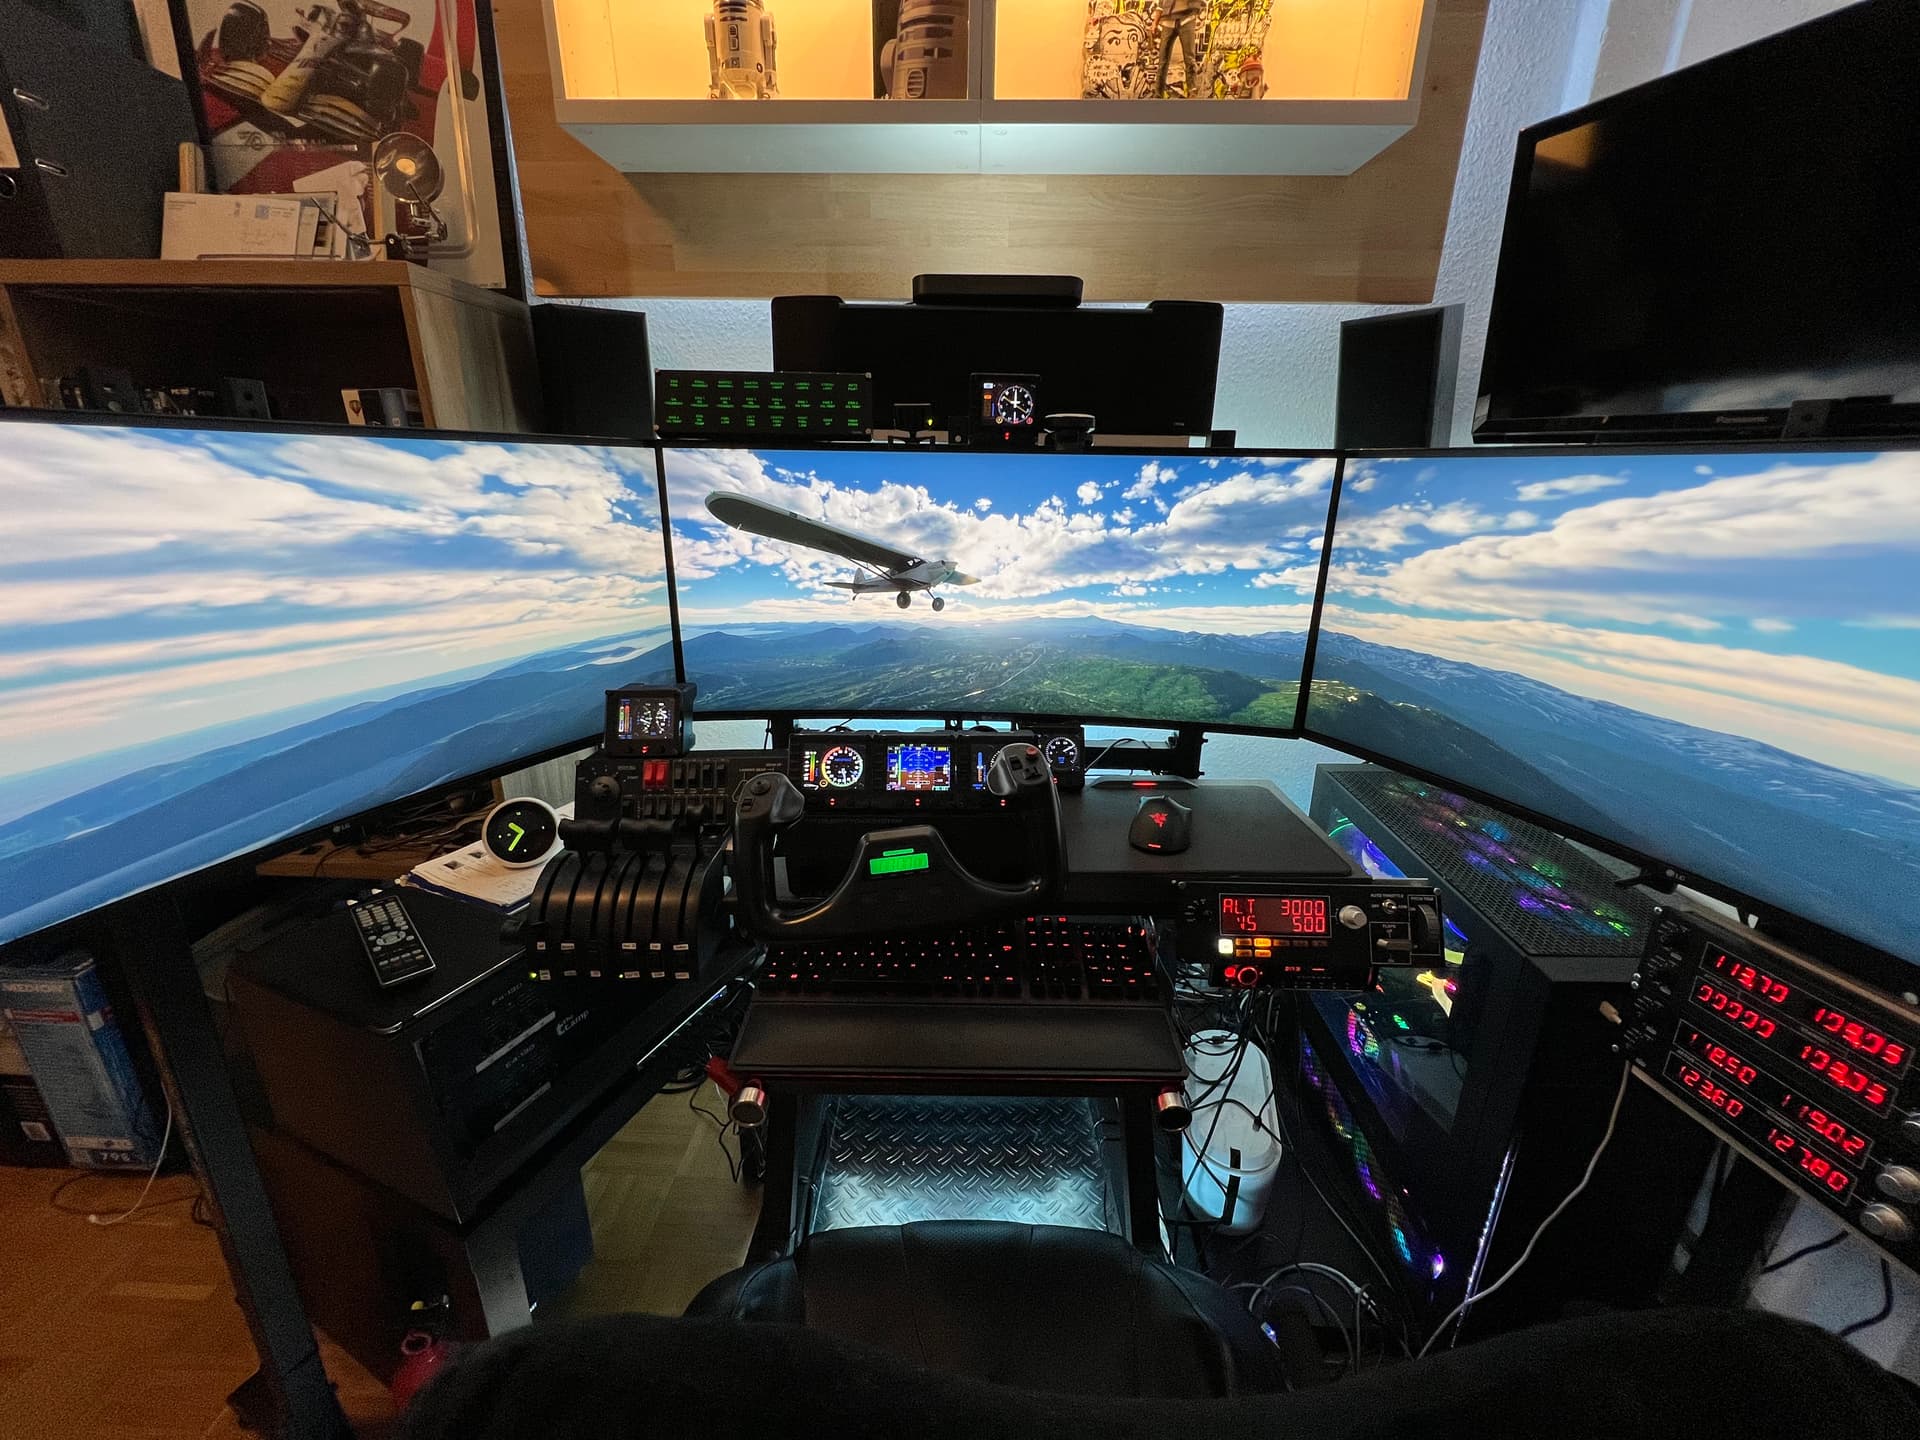 This new $500 flight yoke and quadrant is as realistic as it gets